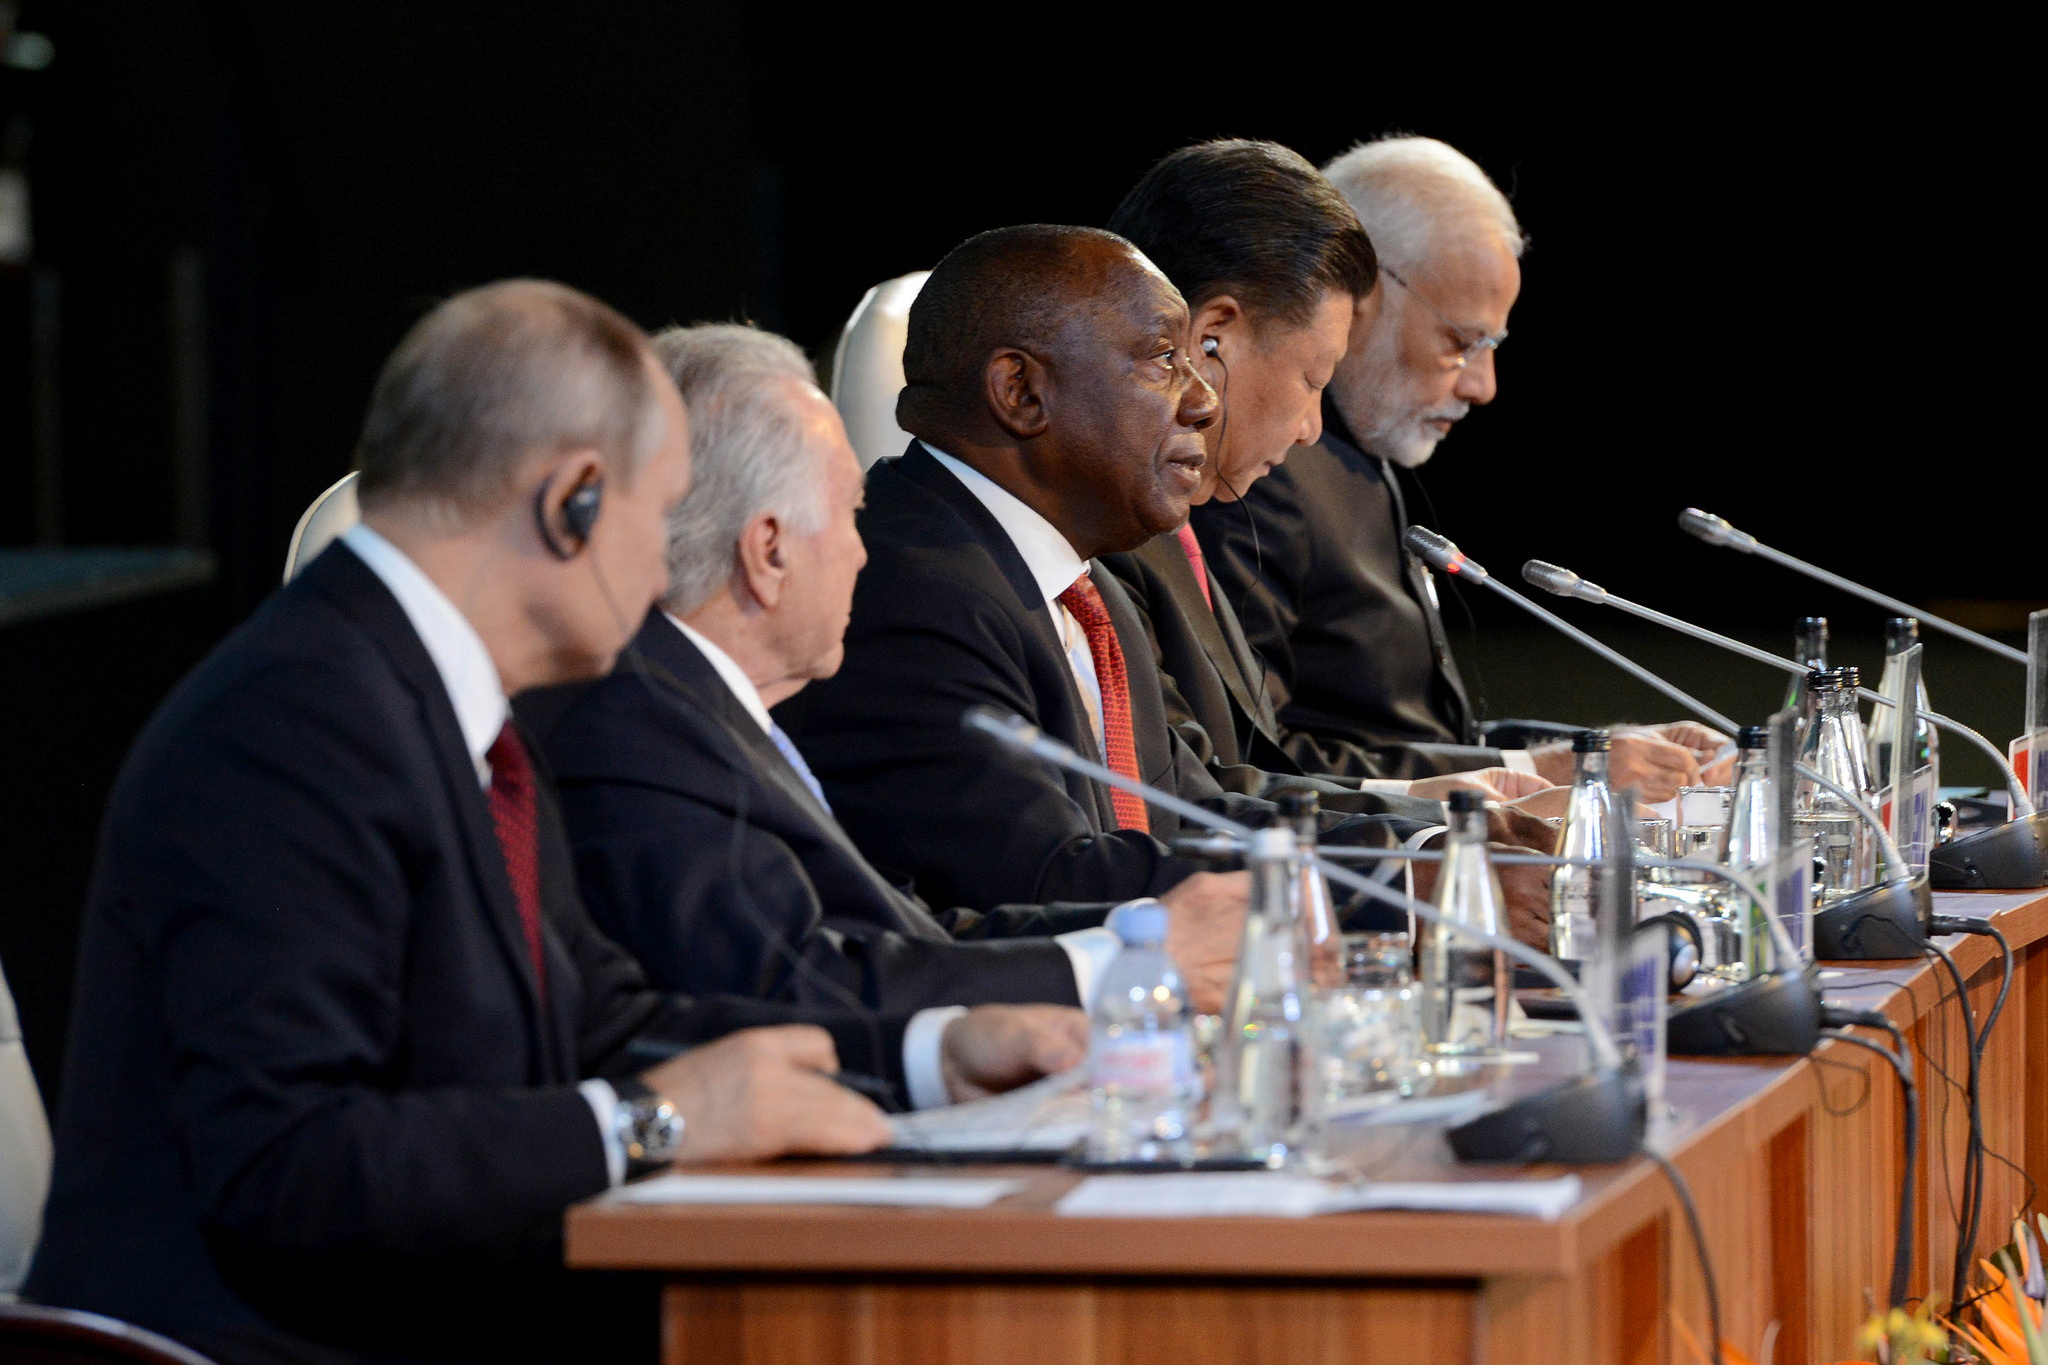 Leaders of the BRICS-countries during its summit in 2018